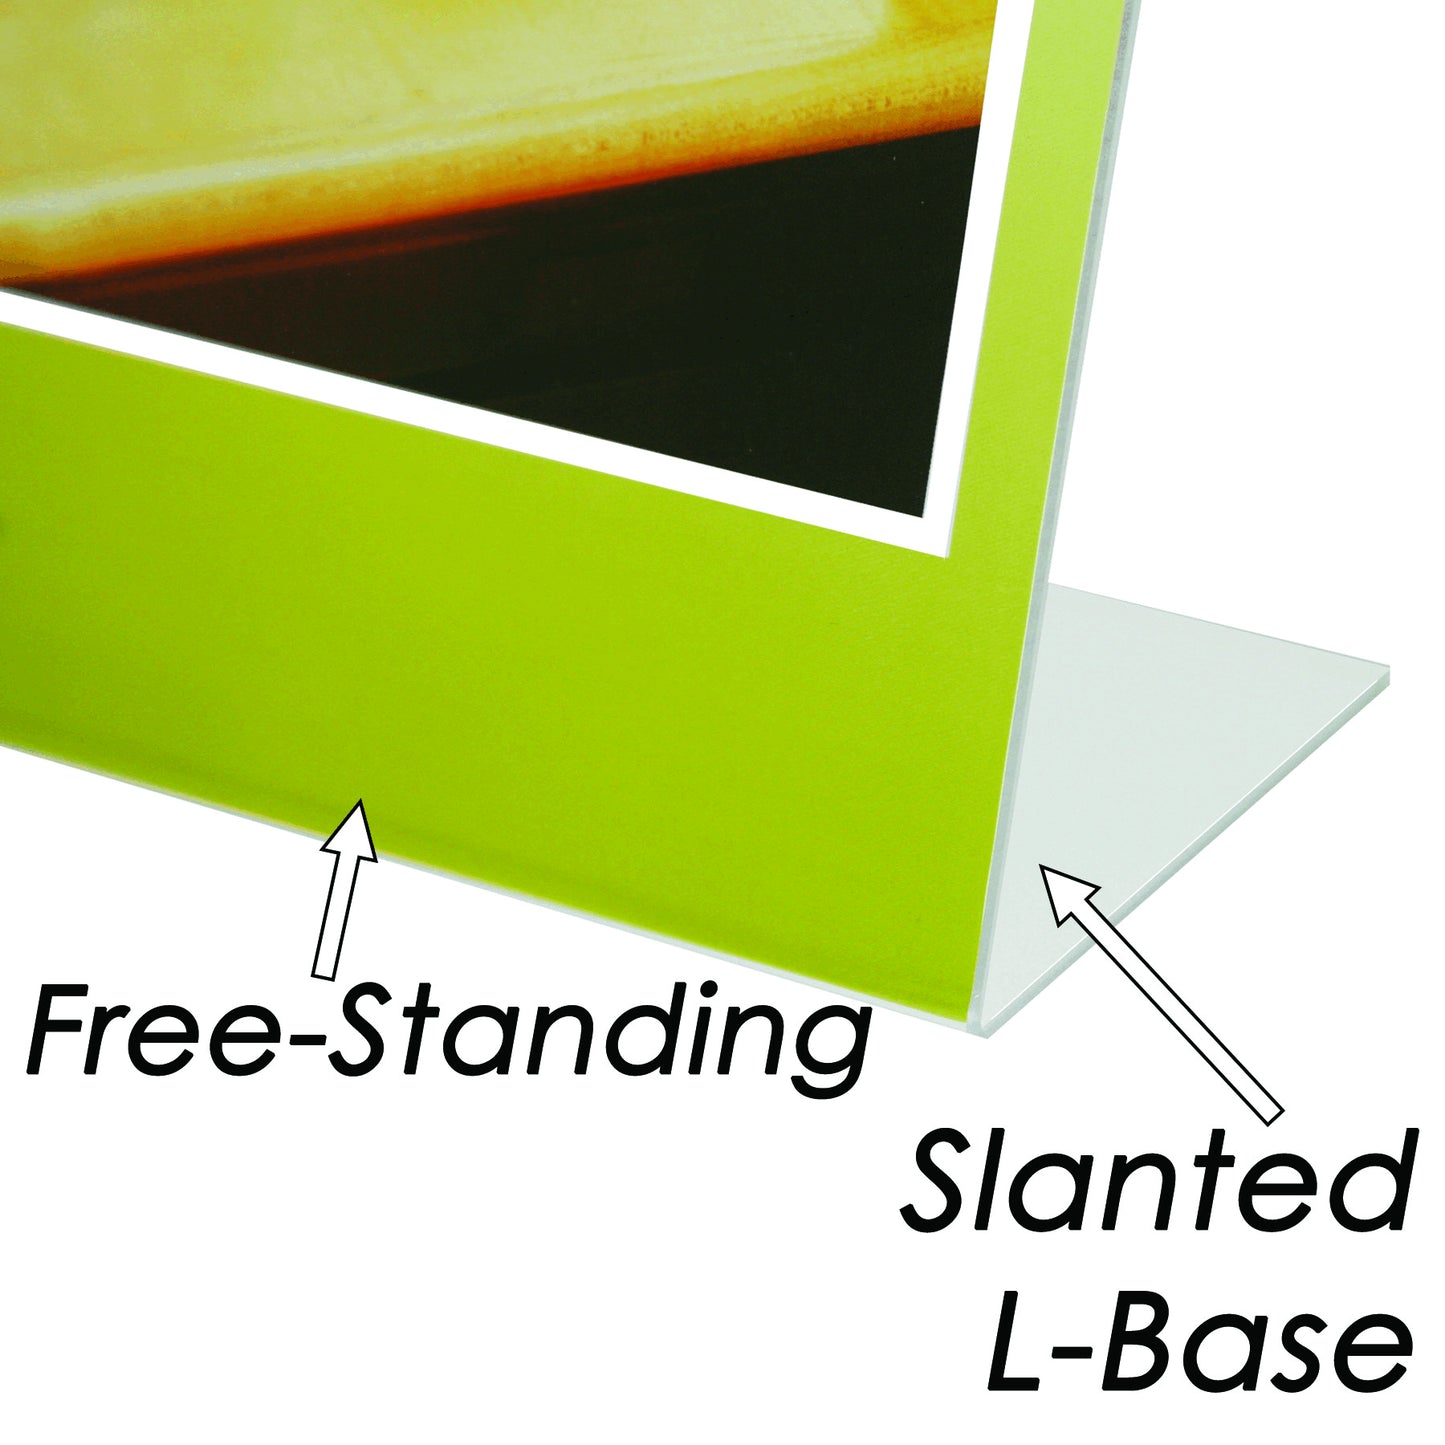 Table Top Slanted L-Base Freestanding Sign,  8.5" x 11"